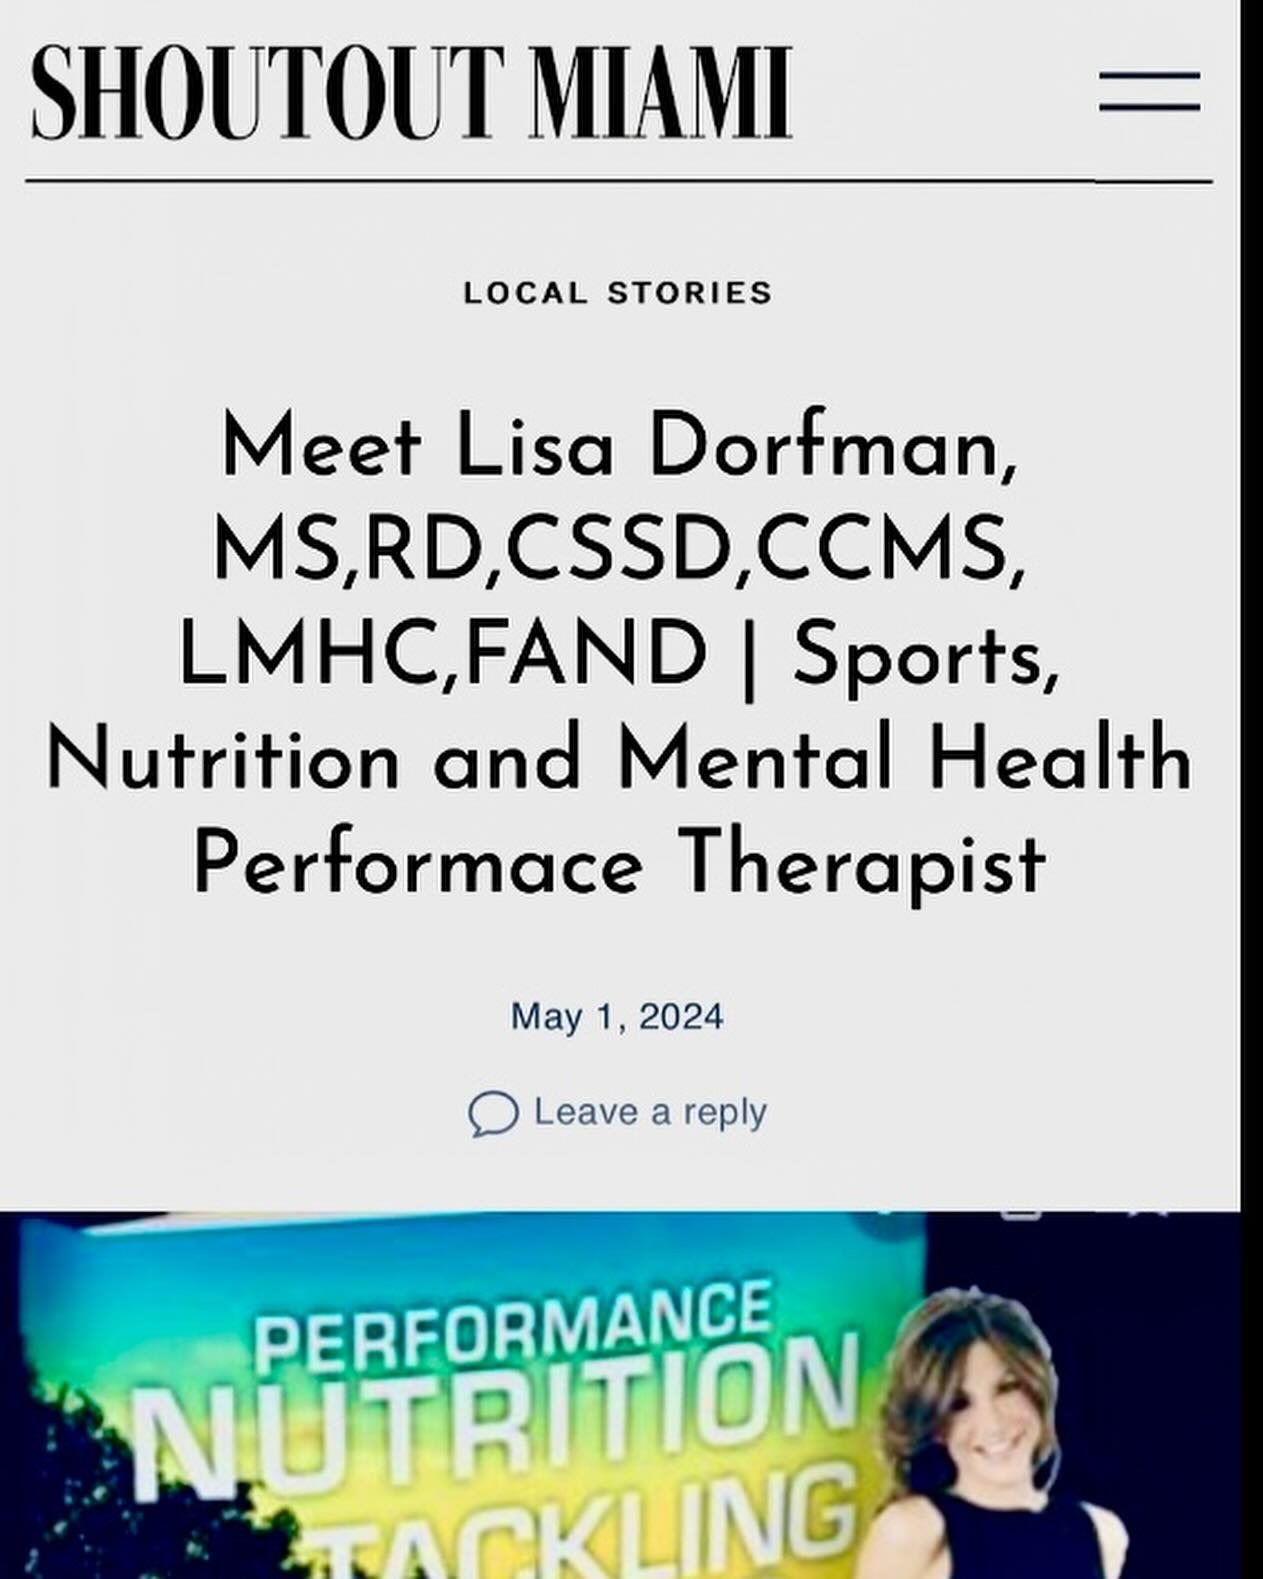 Shout Out to @shoutoutmiamiofficial 
Shout Out Miami for sharing my story of a &ldquo;marathon&rdquo; of the greatest joys and lowest moments in my life.

I am honored to be featured during Mental Health Awareness Month, 

Inspired by family, friends